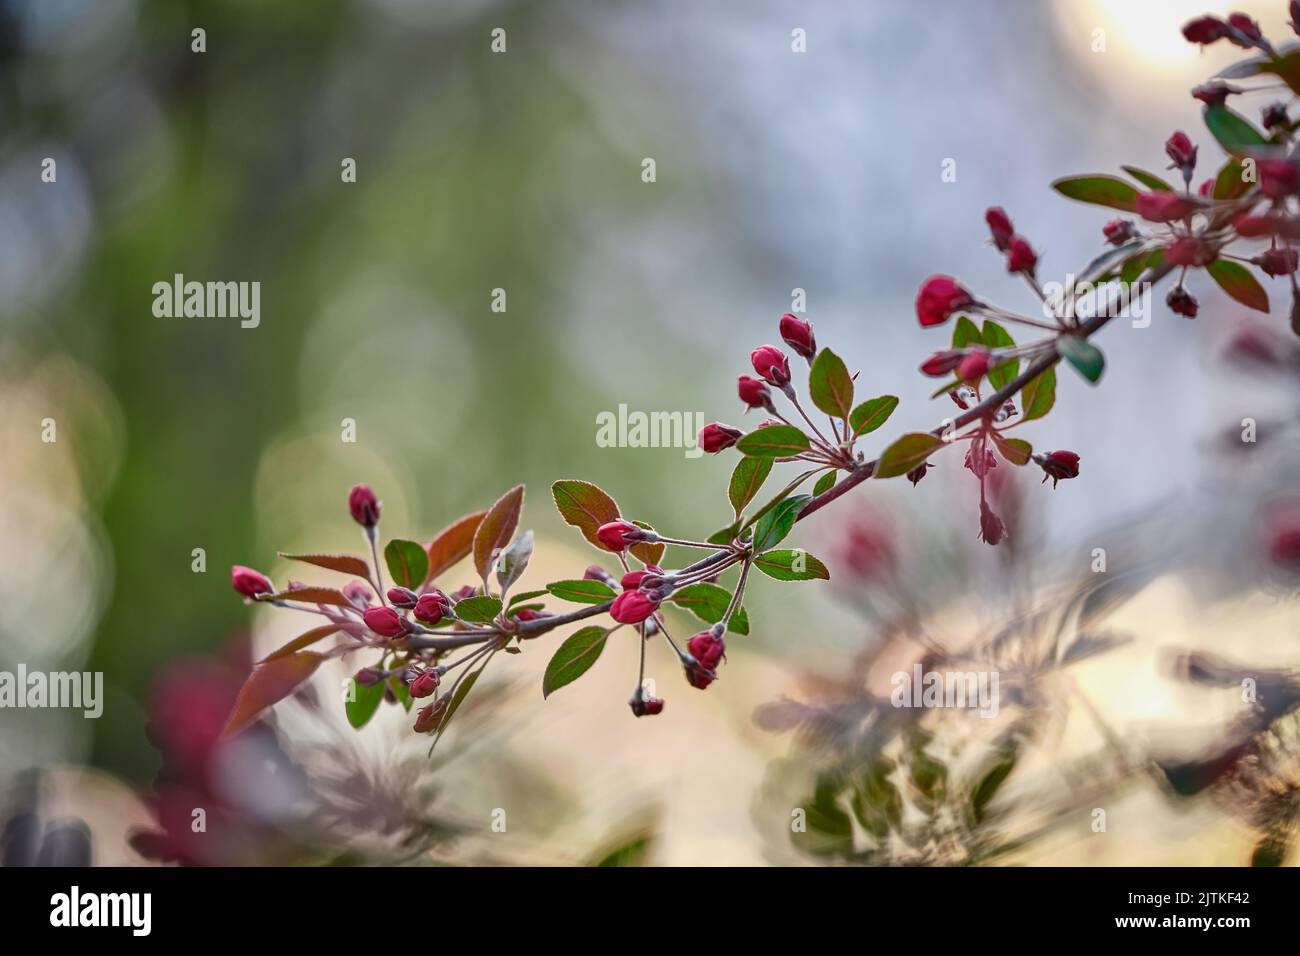 A selective focus shor of Malus niedzwetzkyana tree blossoms in a park Stock Photo